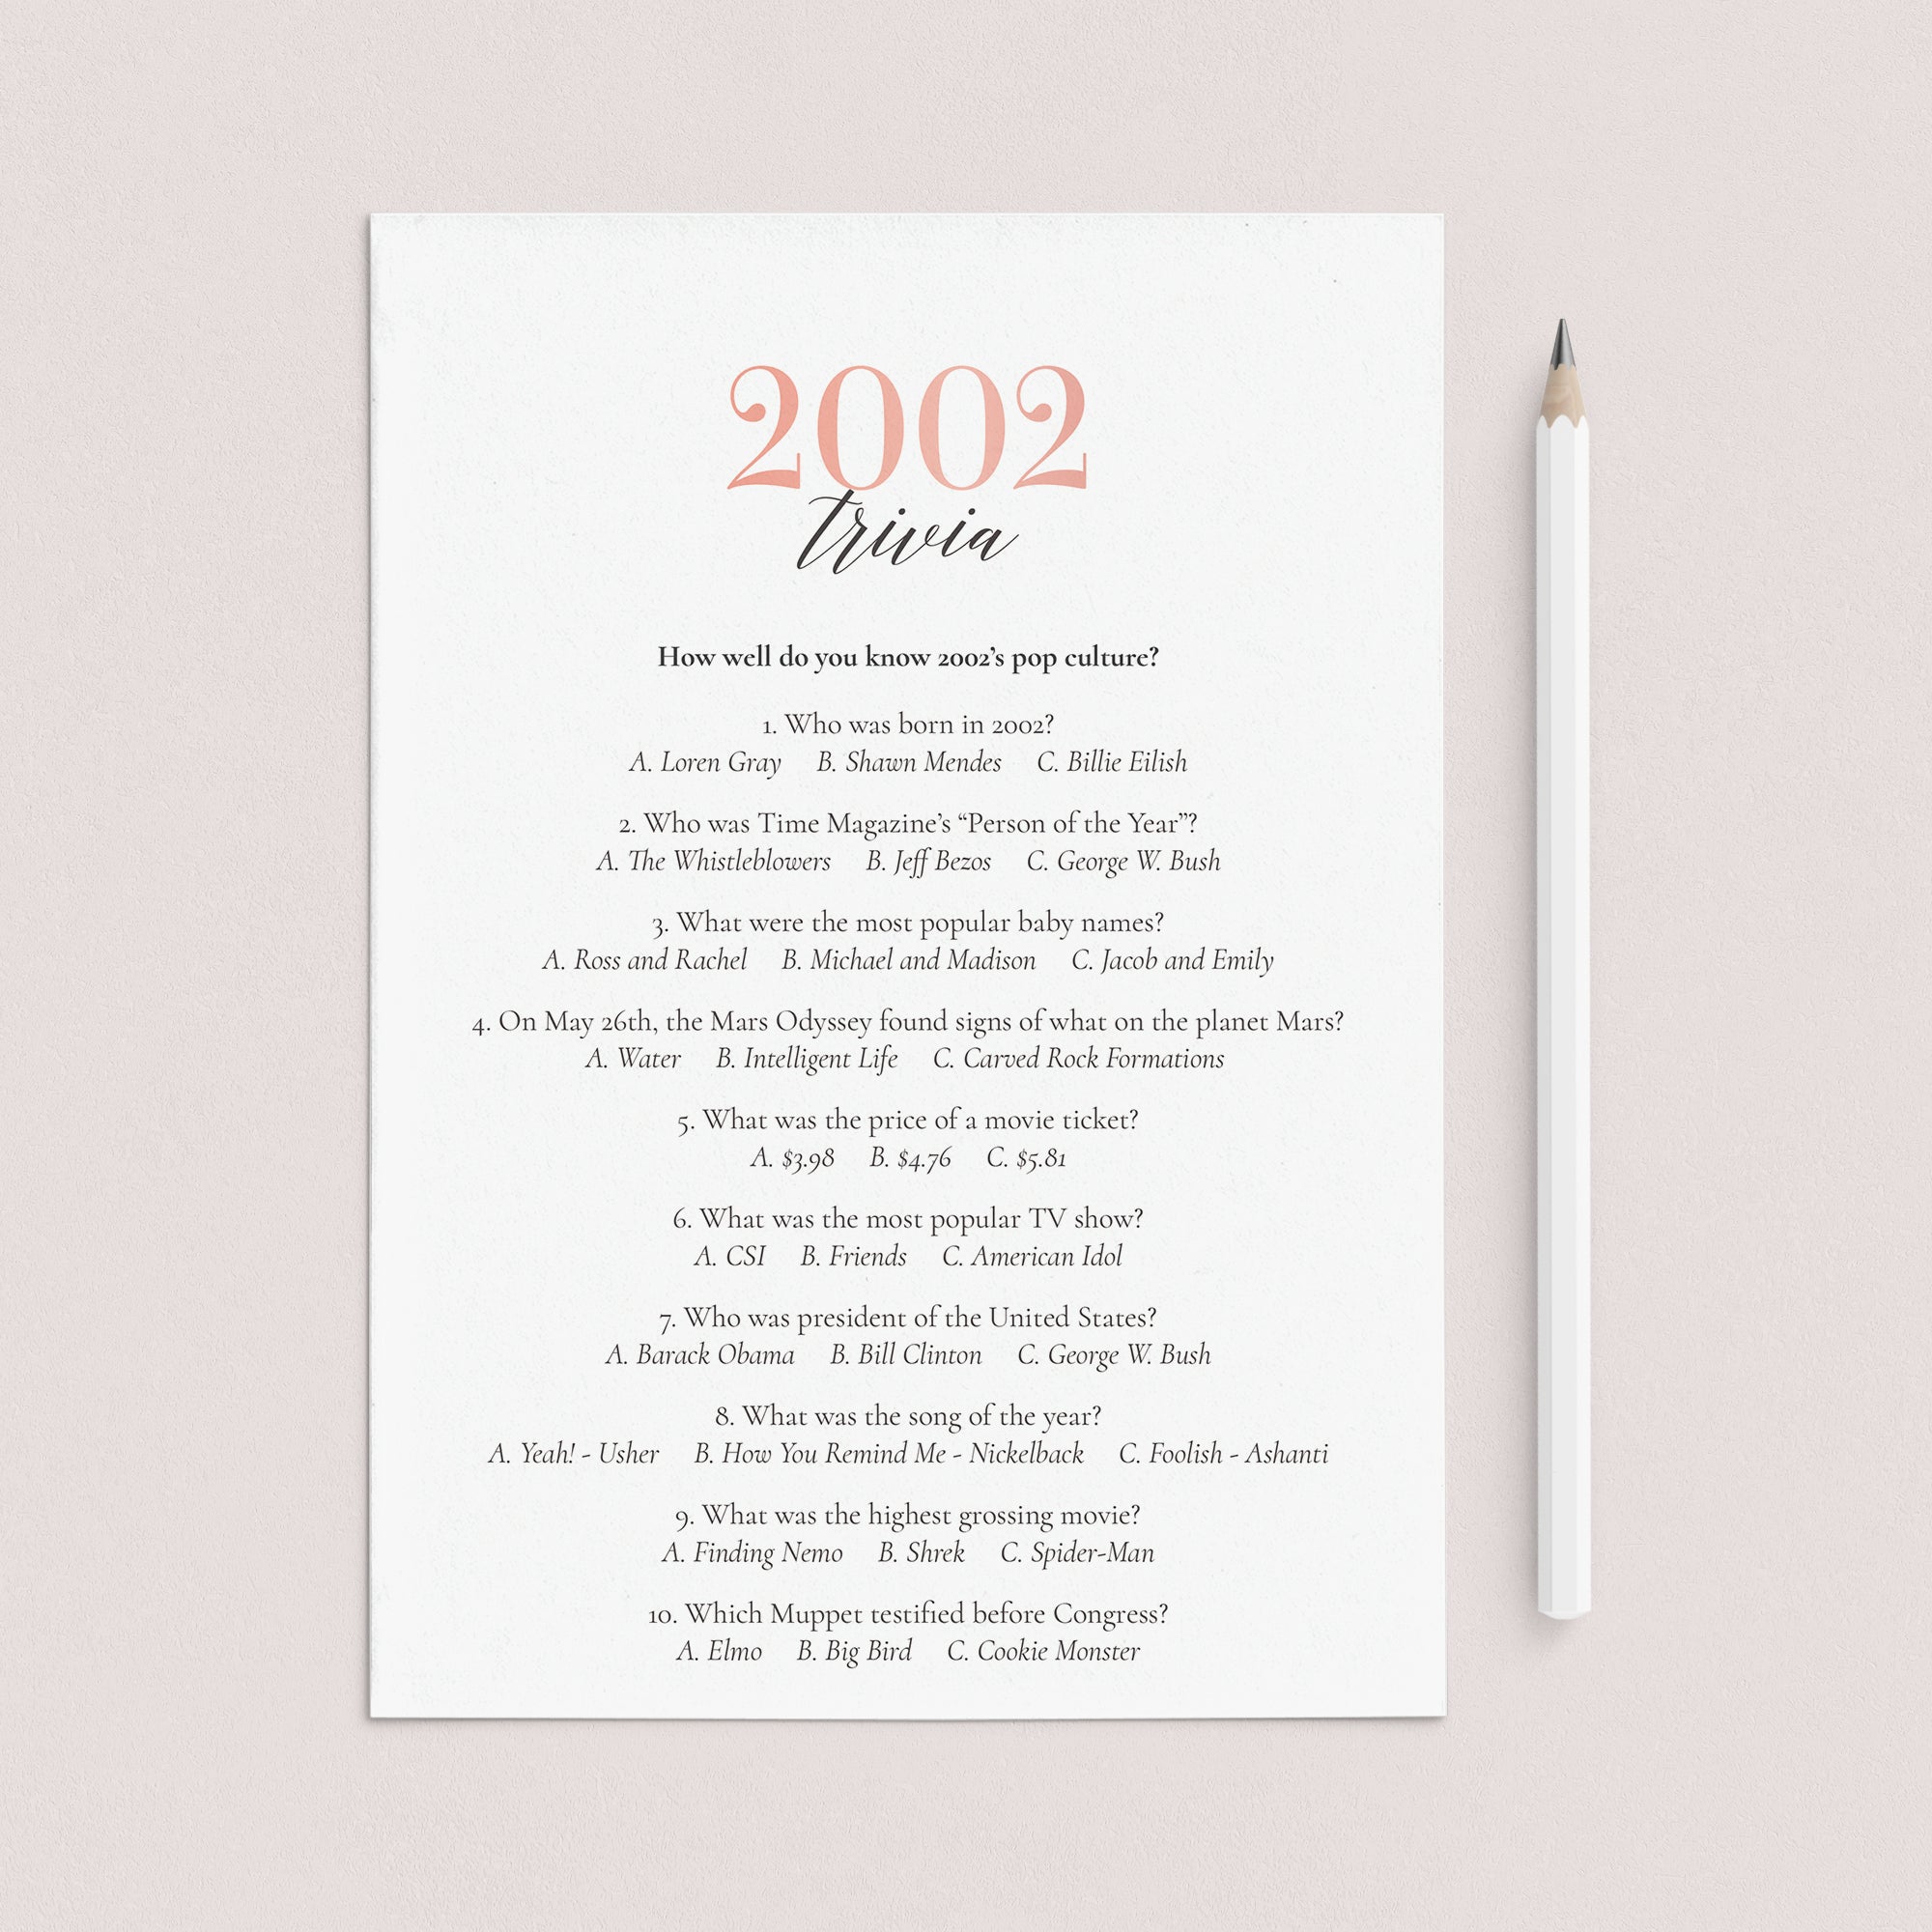 2002 Trivia Questions and Answers Printable by LittleSizzle